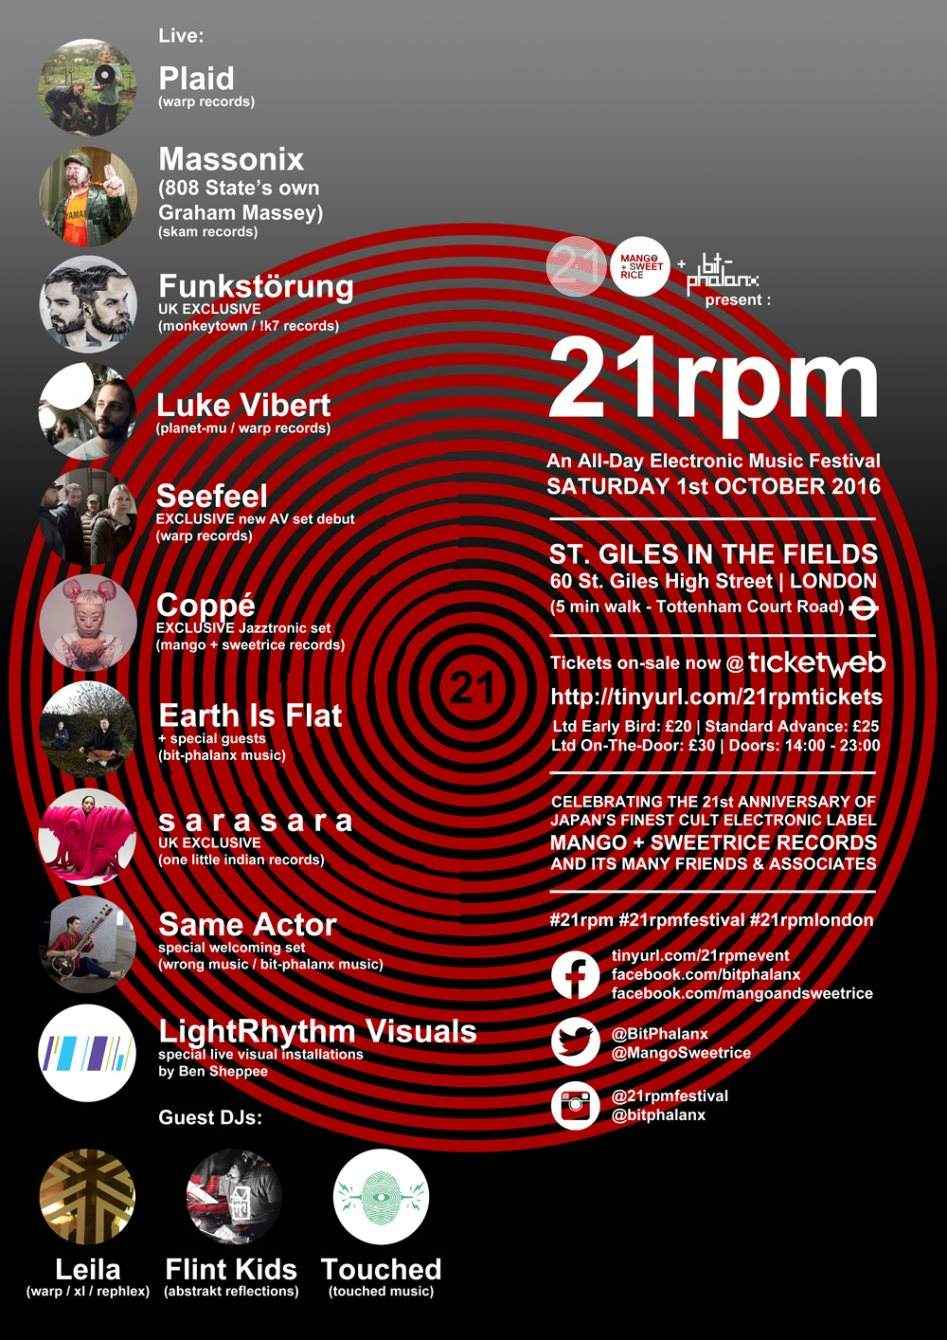 21rpm: An All-Day Electronic Music Festival - Página trasera